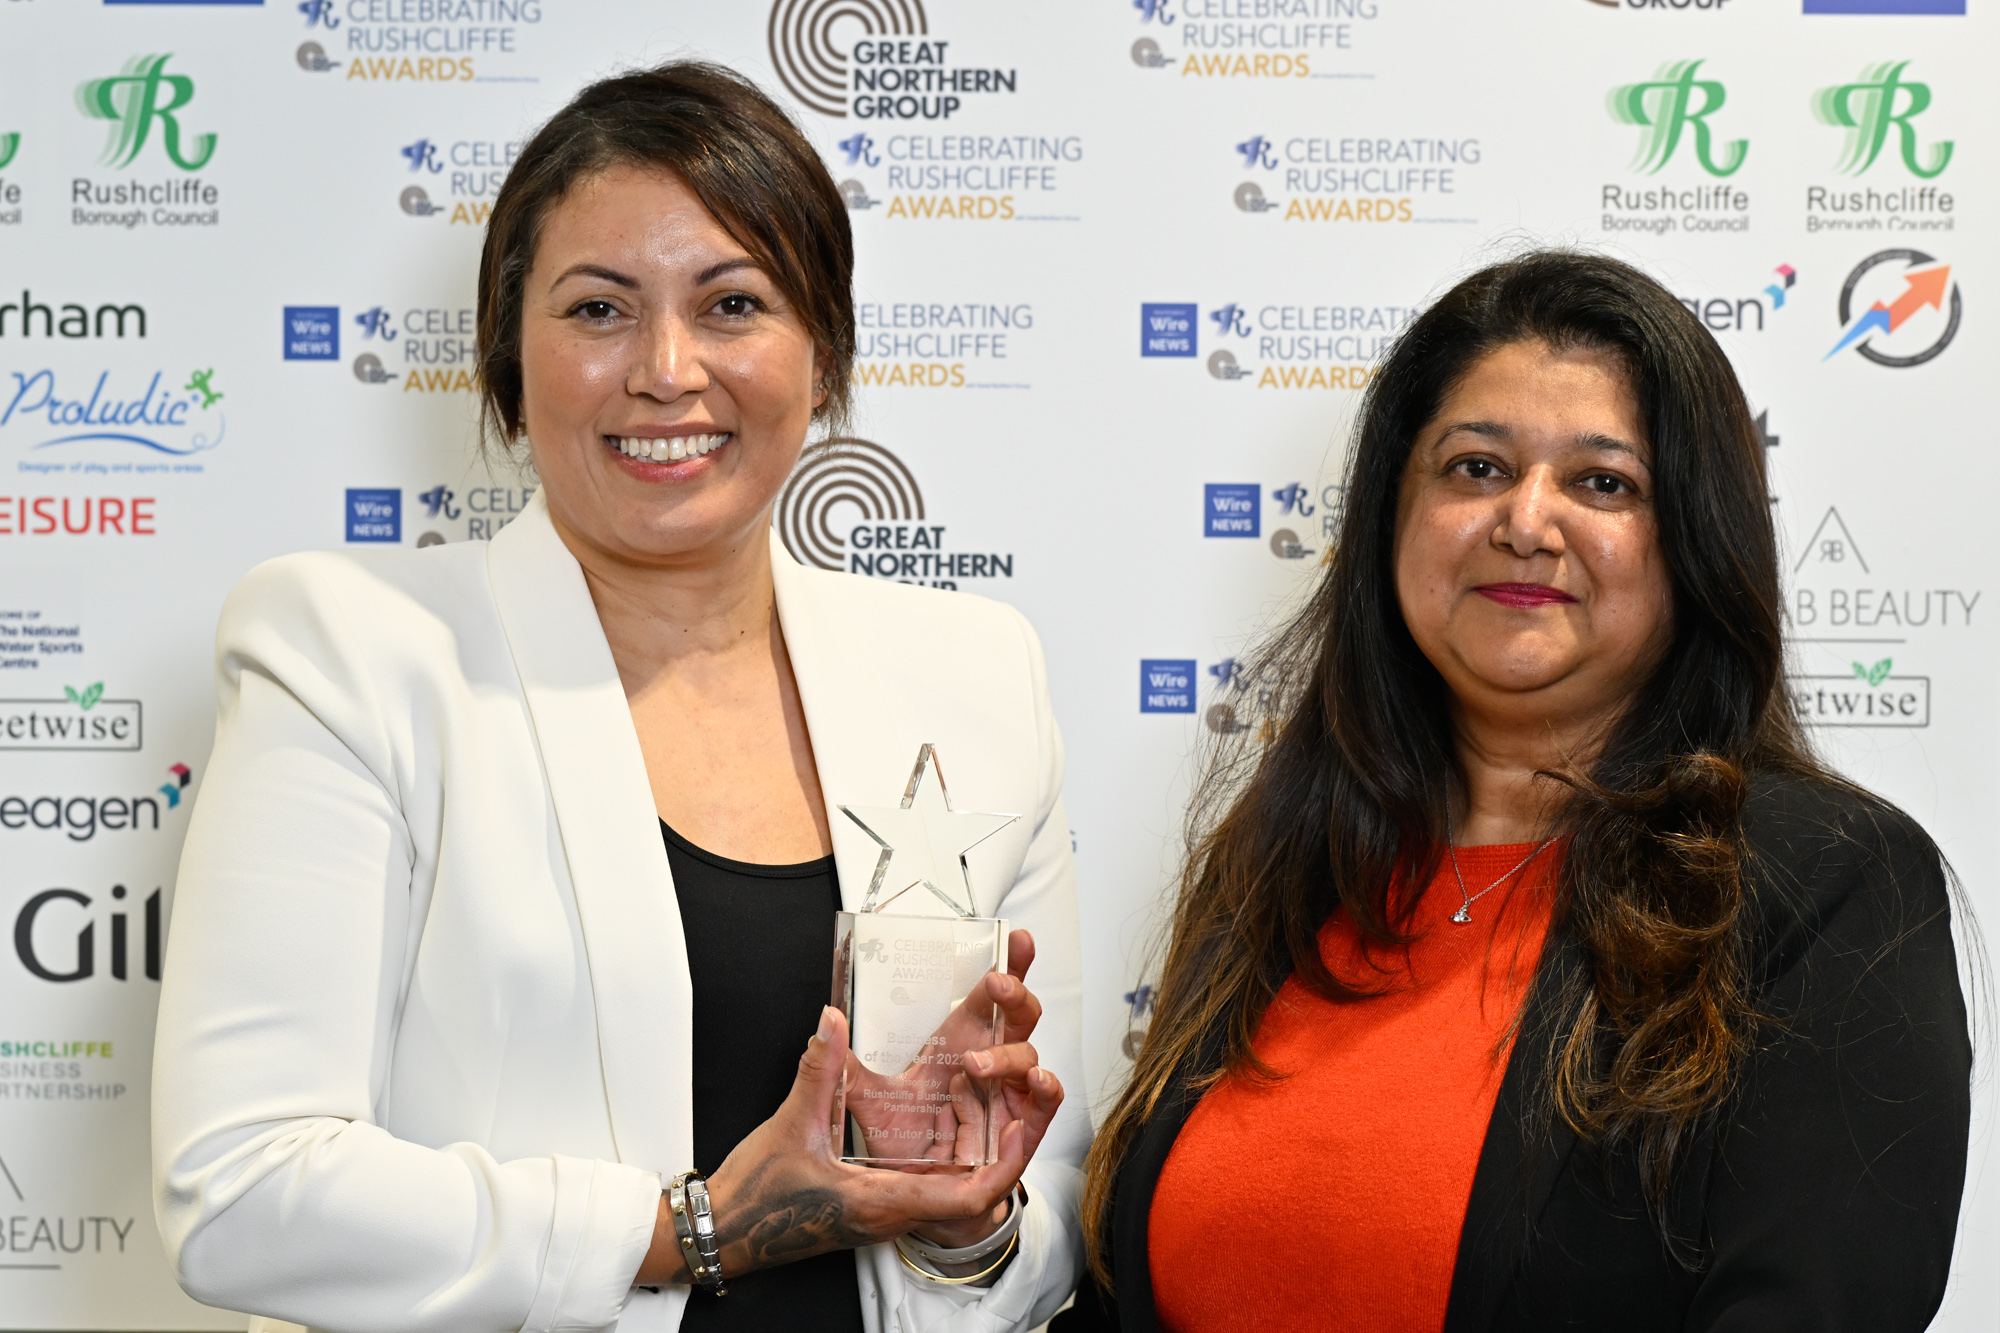 Business of the Year winner The Tutor Boss owned by Krissi Saccoh with sponsor Shamshad Walker from RBP